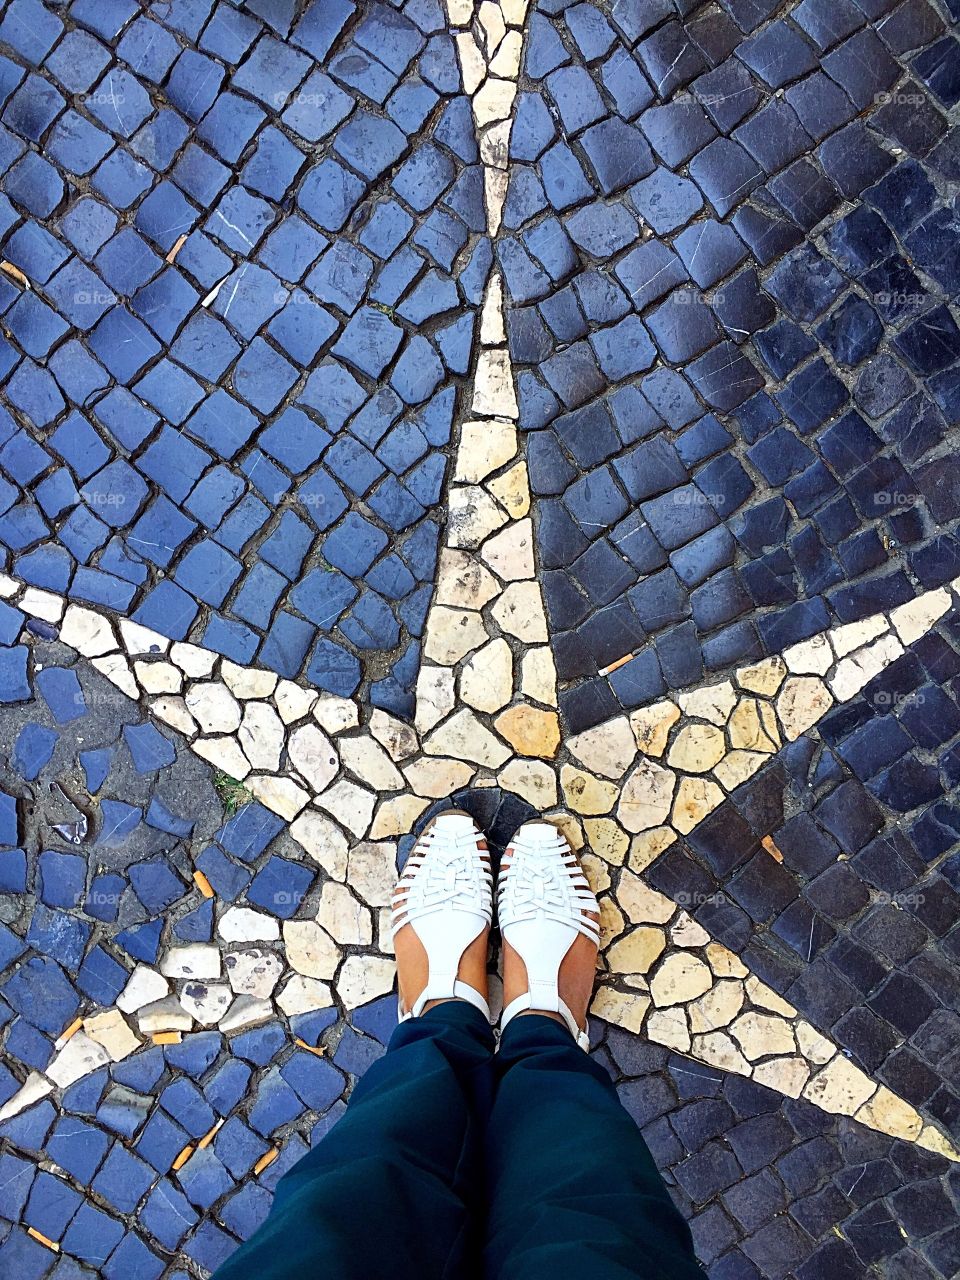 Feet selfie with cobble stone paving in the background 